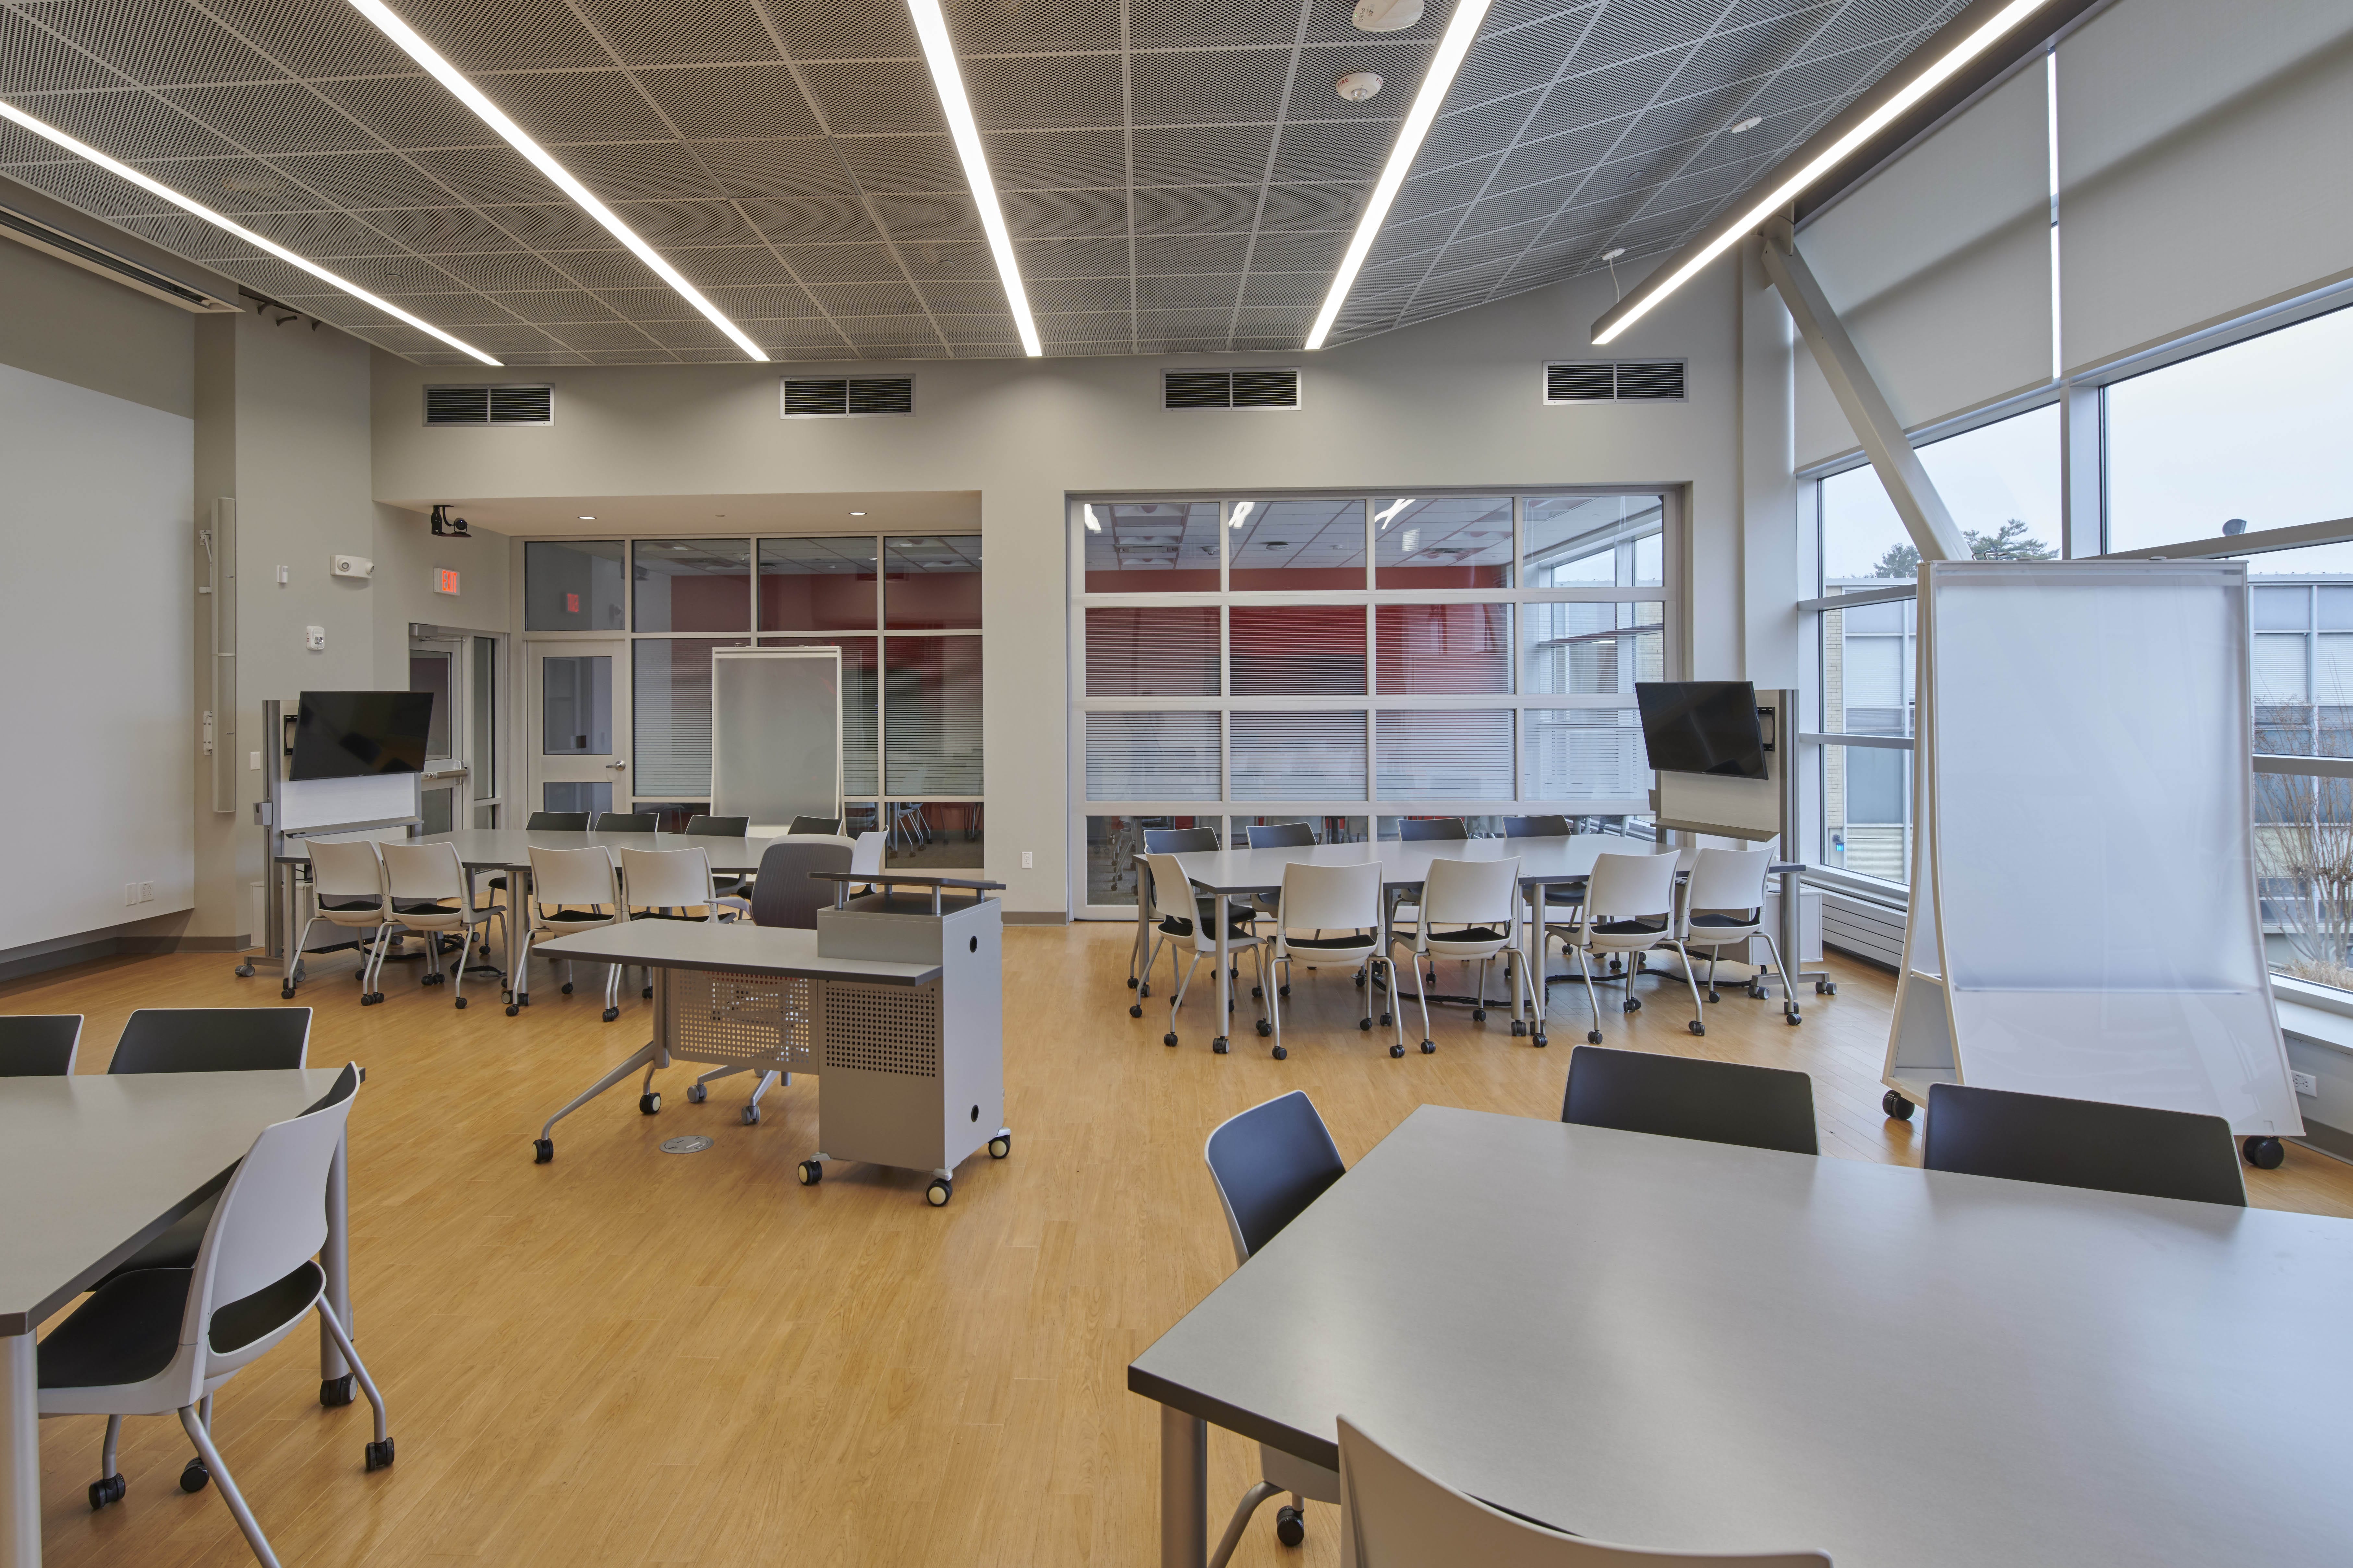 A new high-tech learning space opens in Anheuser-Busch Academic Hall.